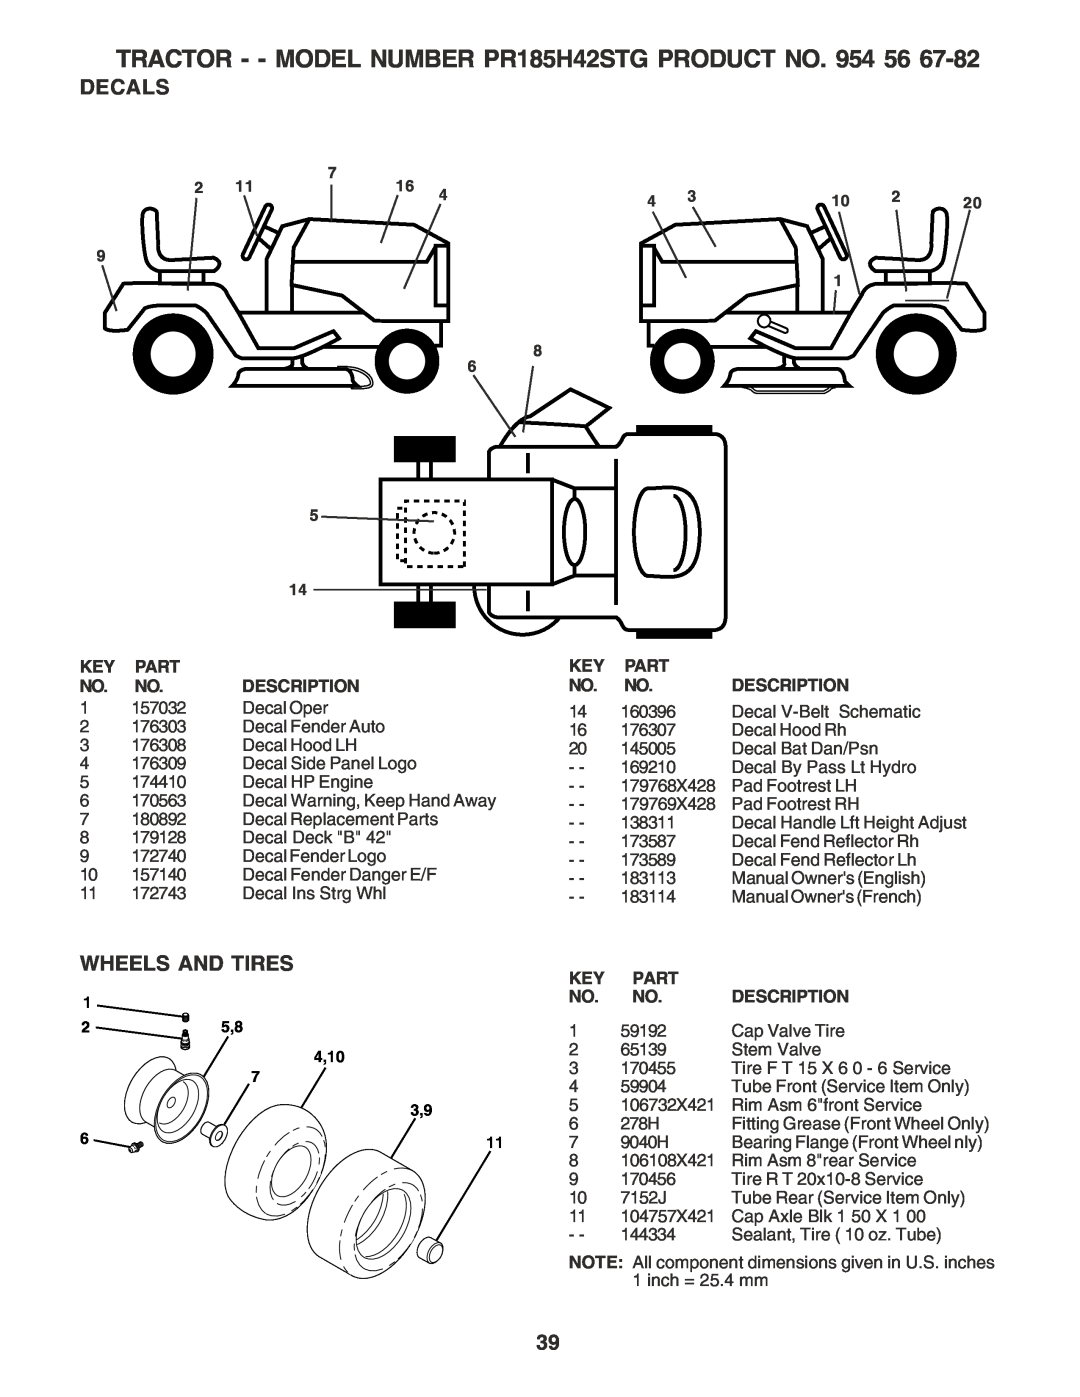 Poulan Decals, Wheels And Tires, TRACTOR - - MODEL NUMBER PR185H42STG PRODUCT NO, Decal Warning, Keep Hand Away 